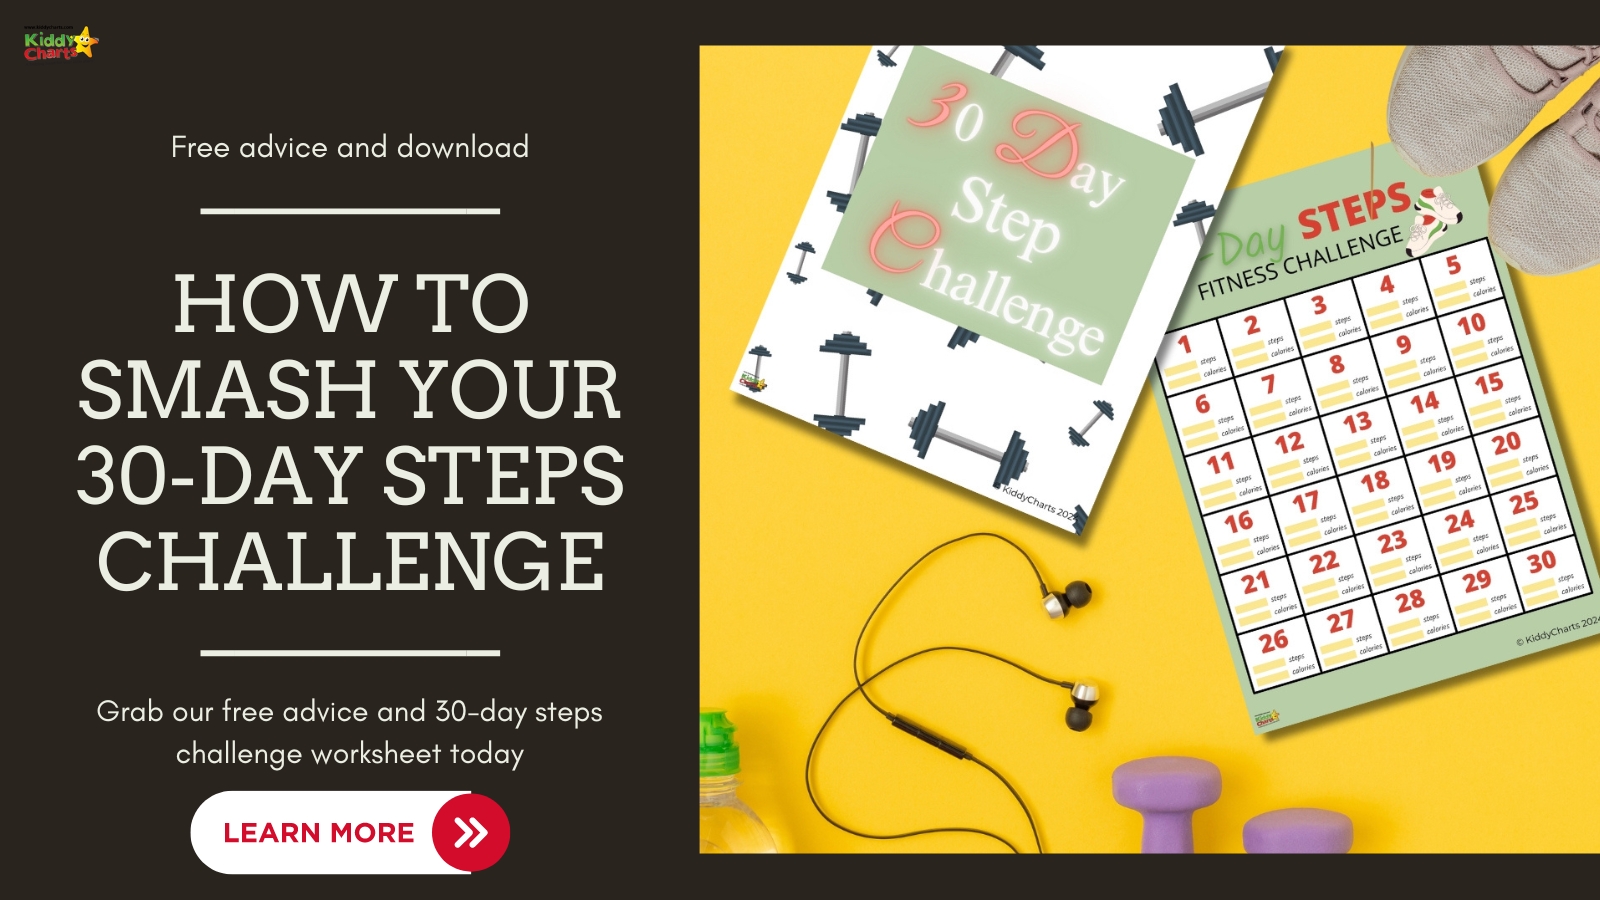 30-day steps challenge for work or play: Includes printable